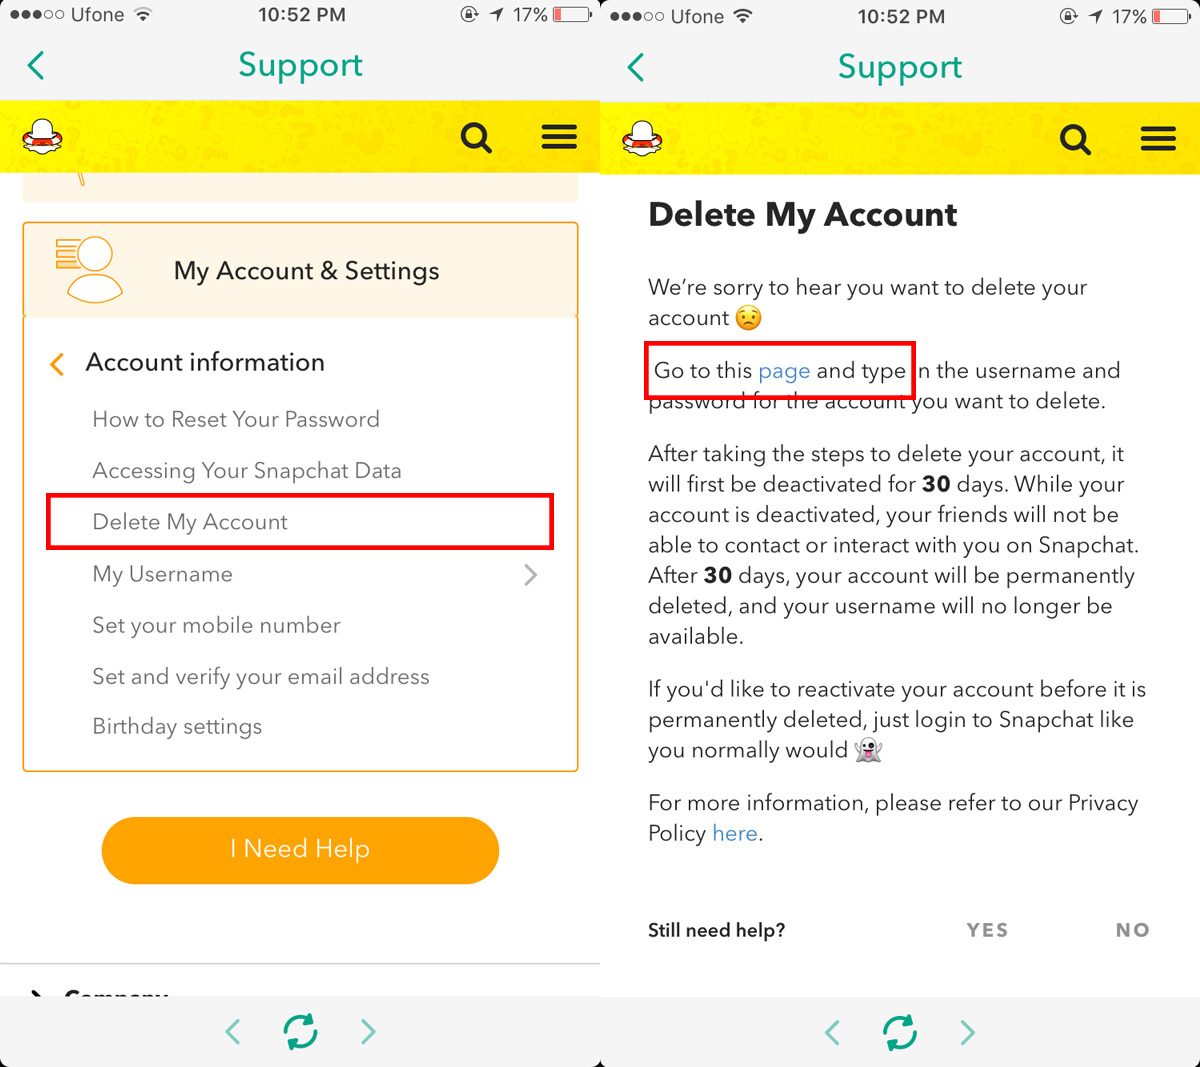 How to delete snapchat account